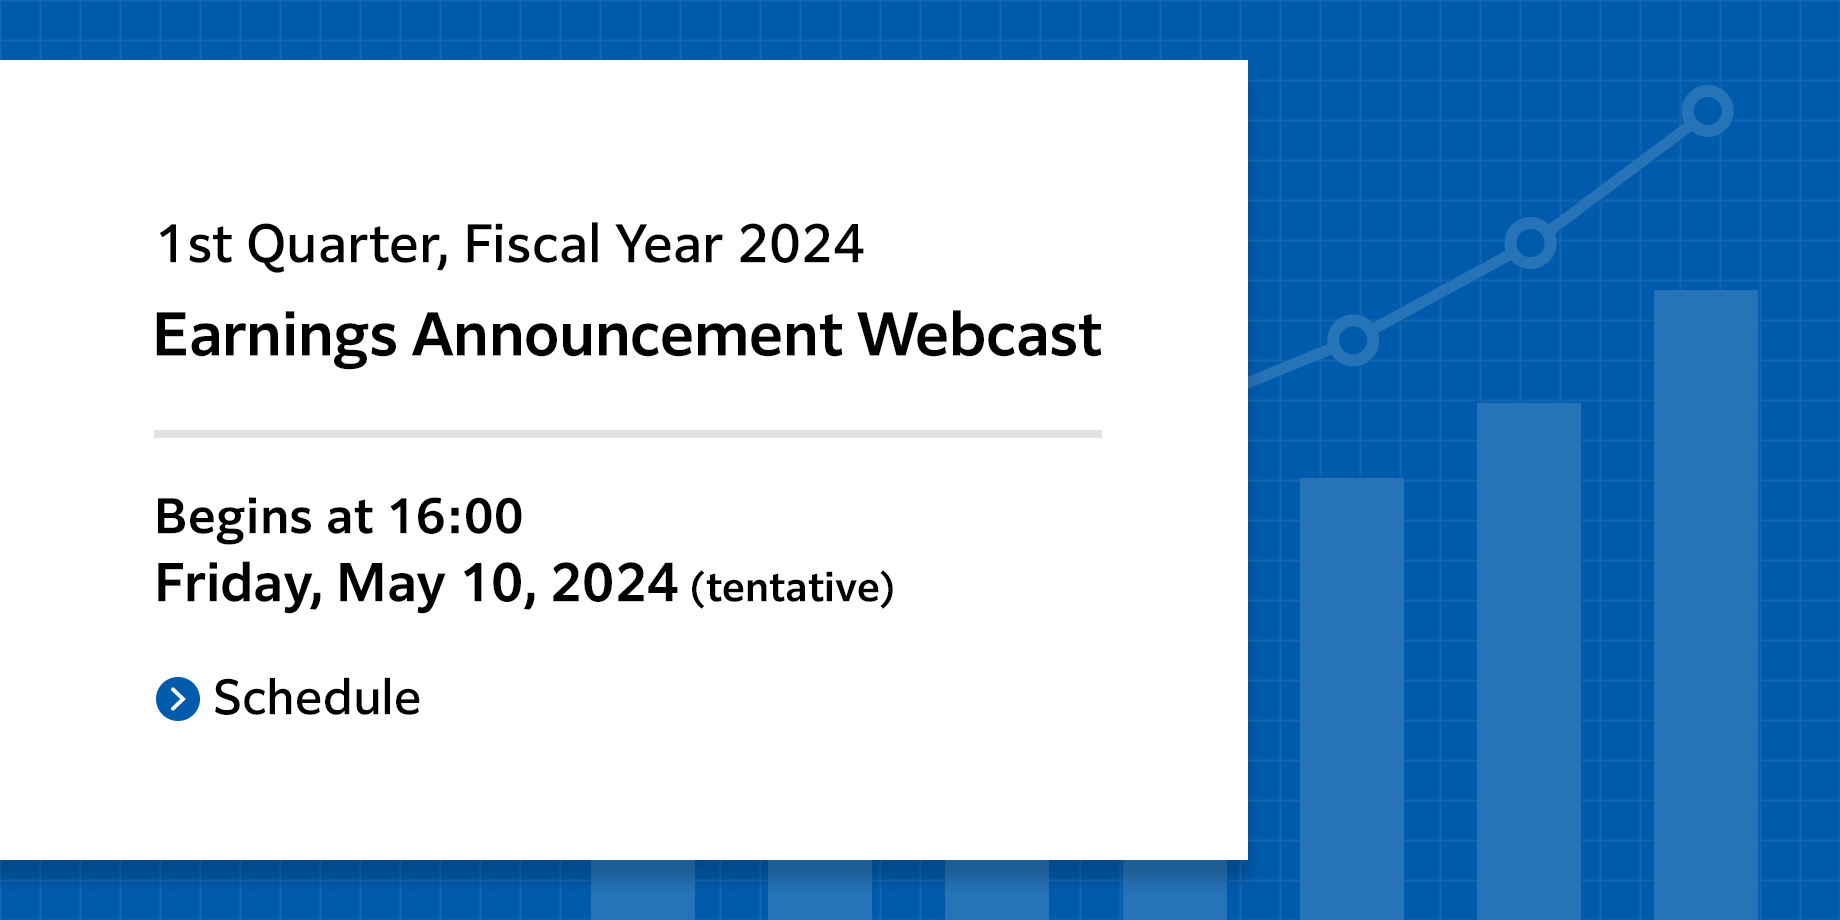 1st Quarter, Fiscal Year 2024 Earnings Announcement Webcast - Friday, May 10, 2024